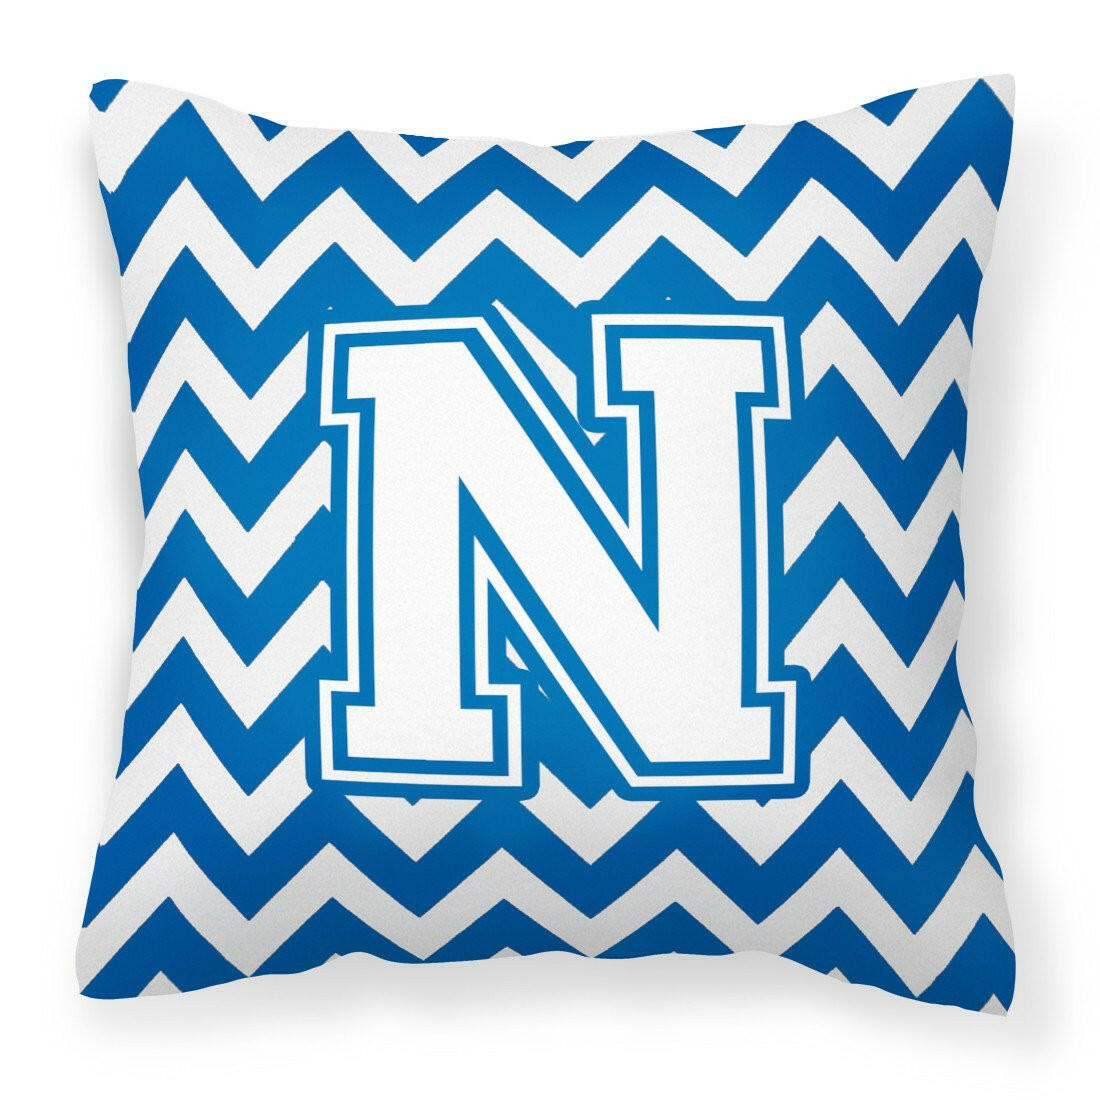 Letter N Chevron Blue and White Fabric Decorative Pillow CJ1045-NPW1414 by Caroline's Treasures